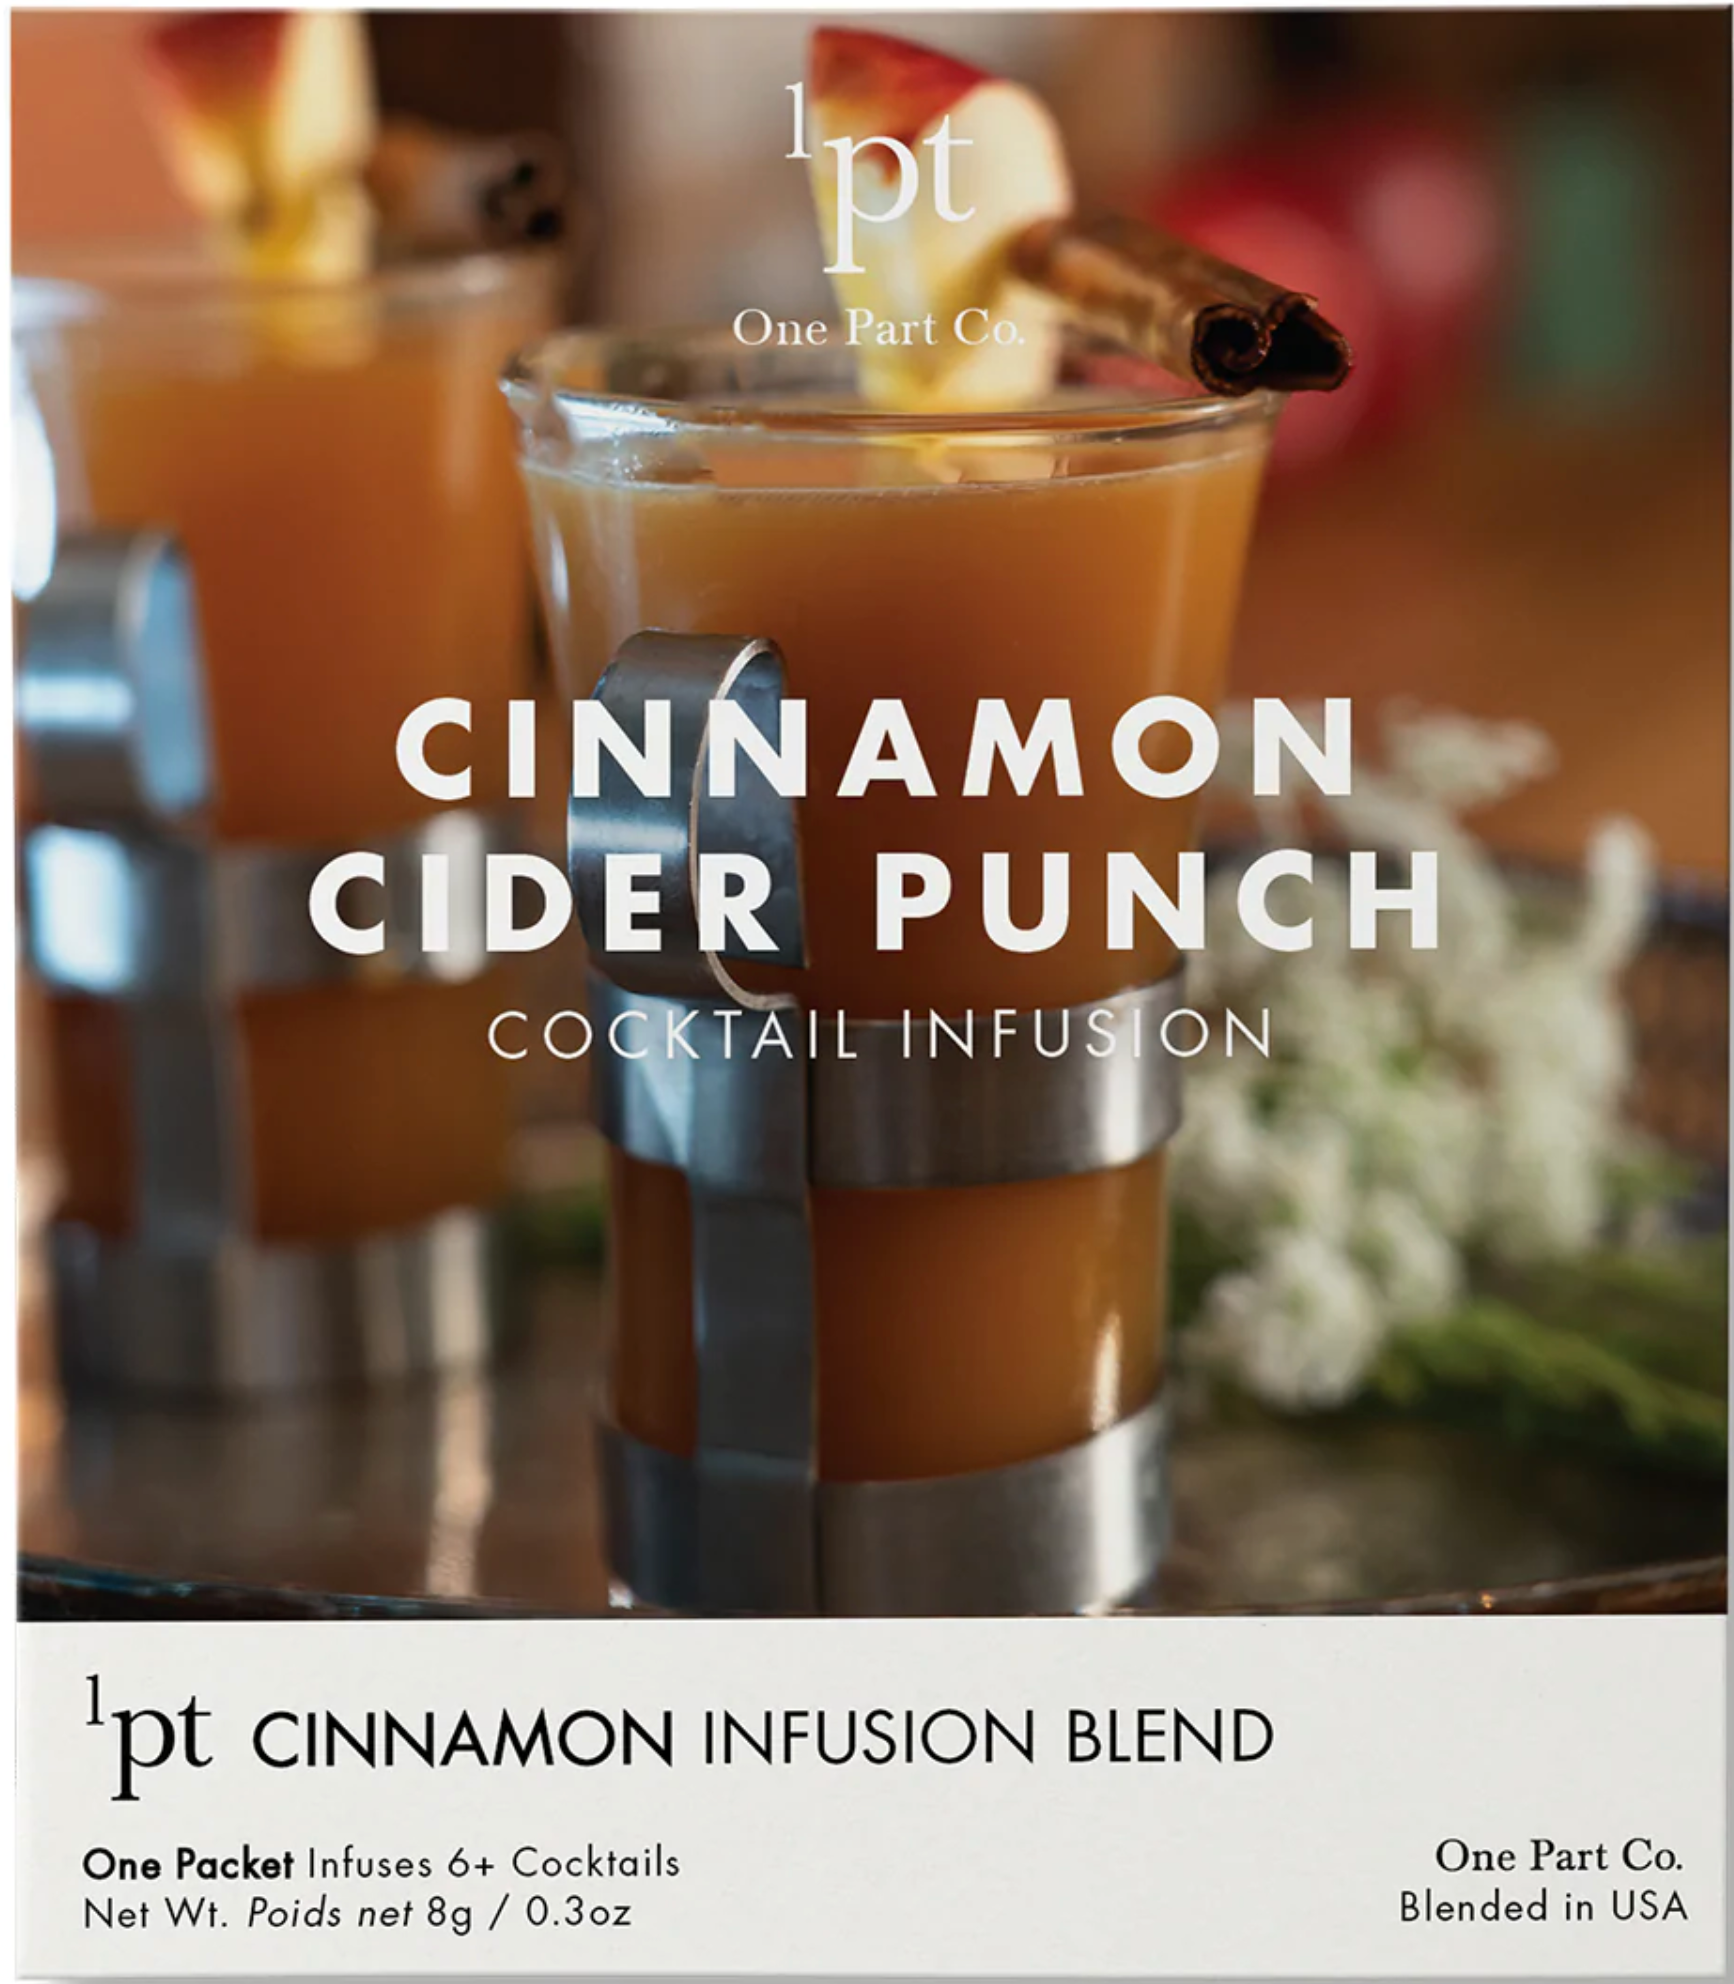 Cinnamon Cider Punch Cocktail Infusion Blend